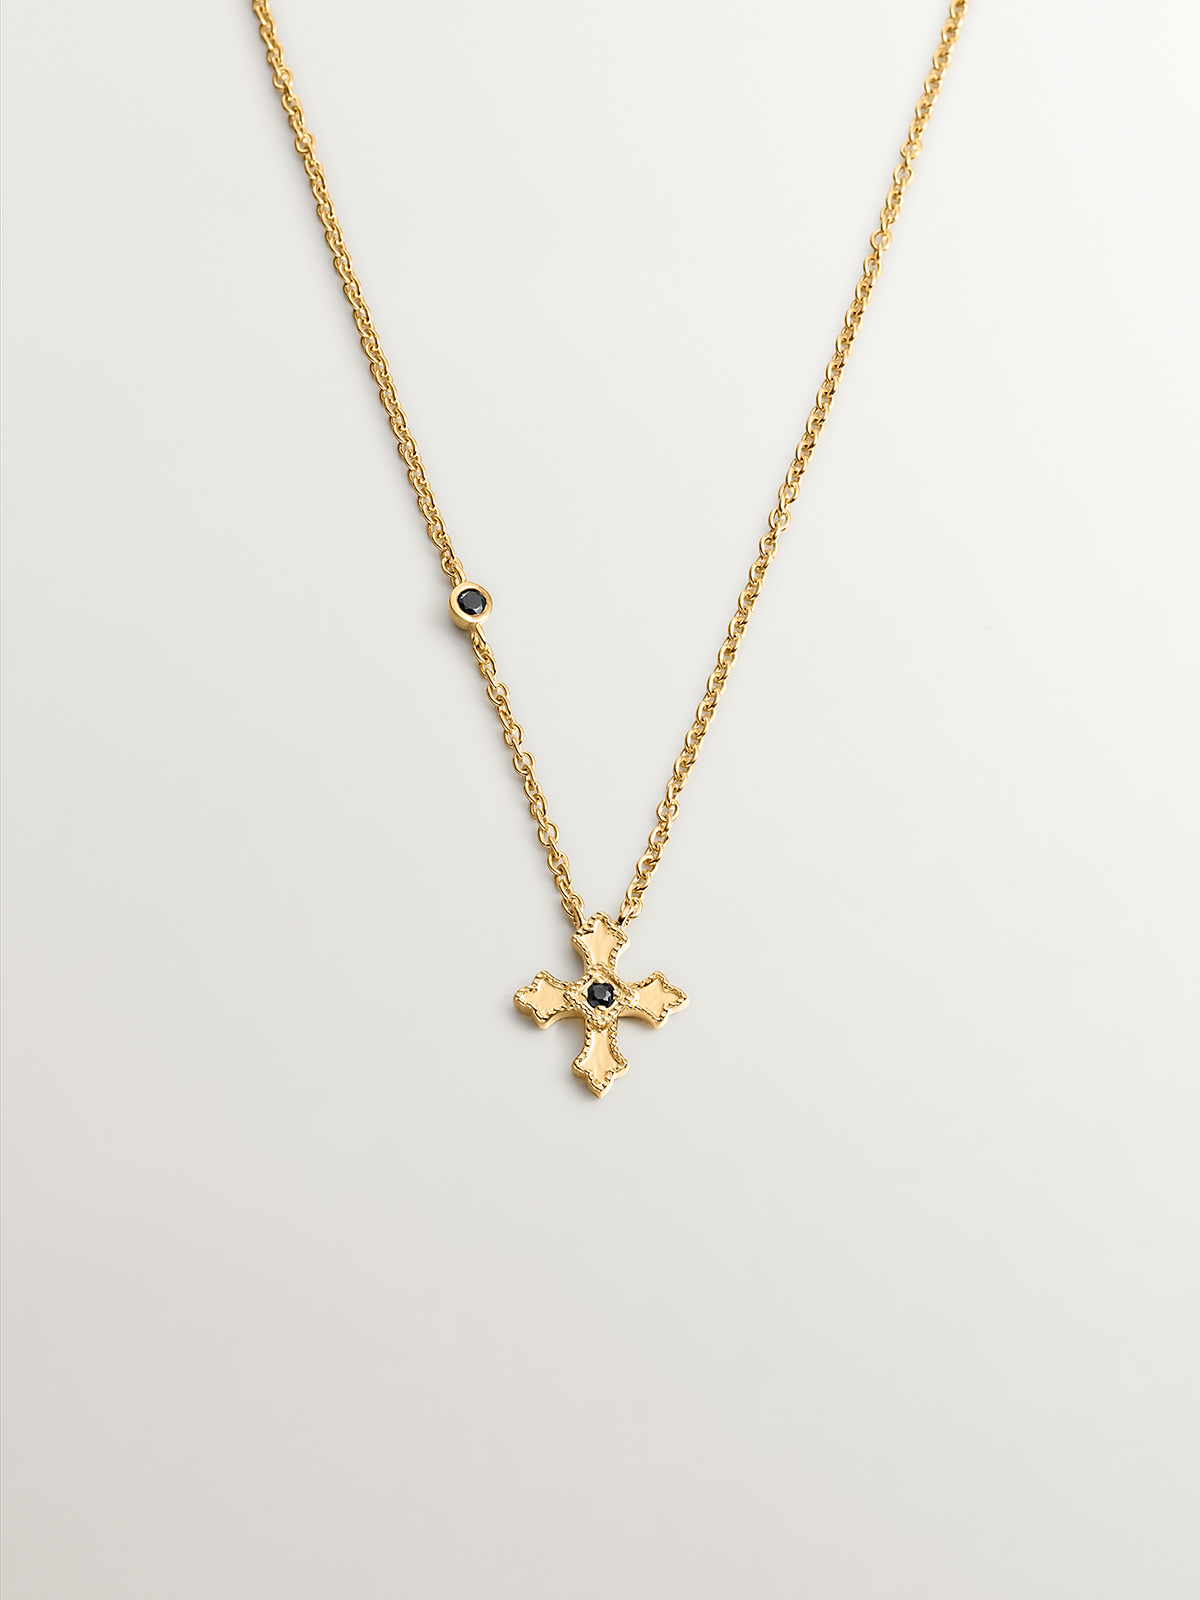 925 Silver pendant dipped in 18K yellow gold with small cross and spinels.